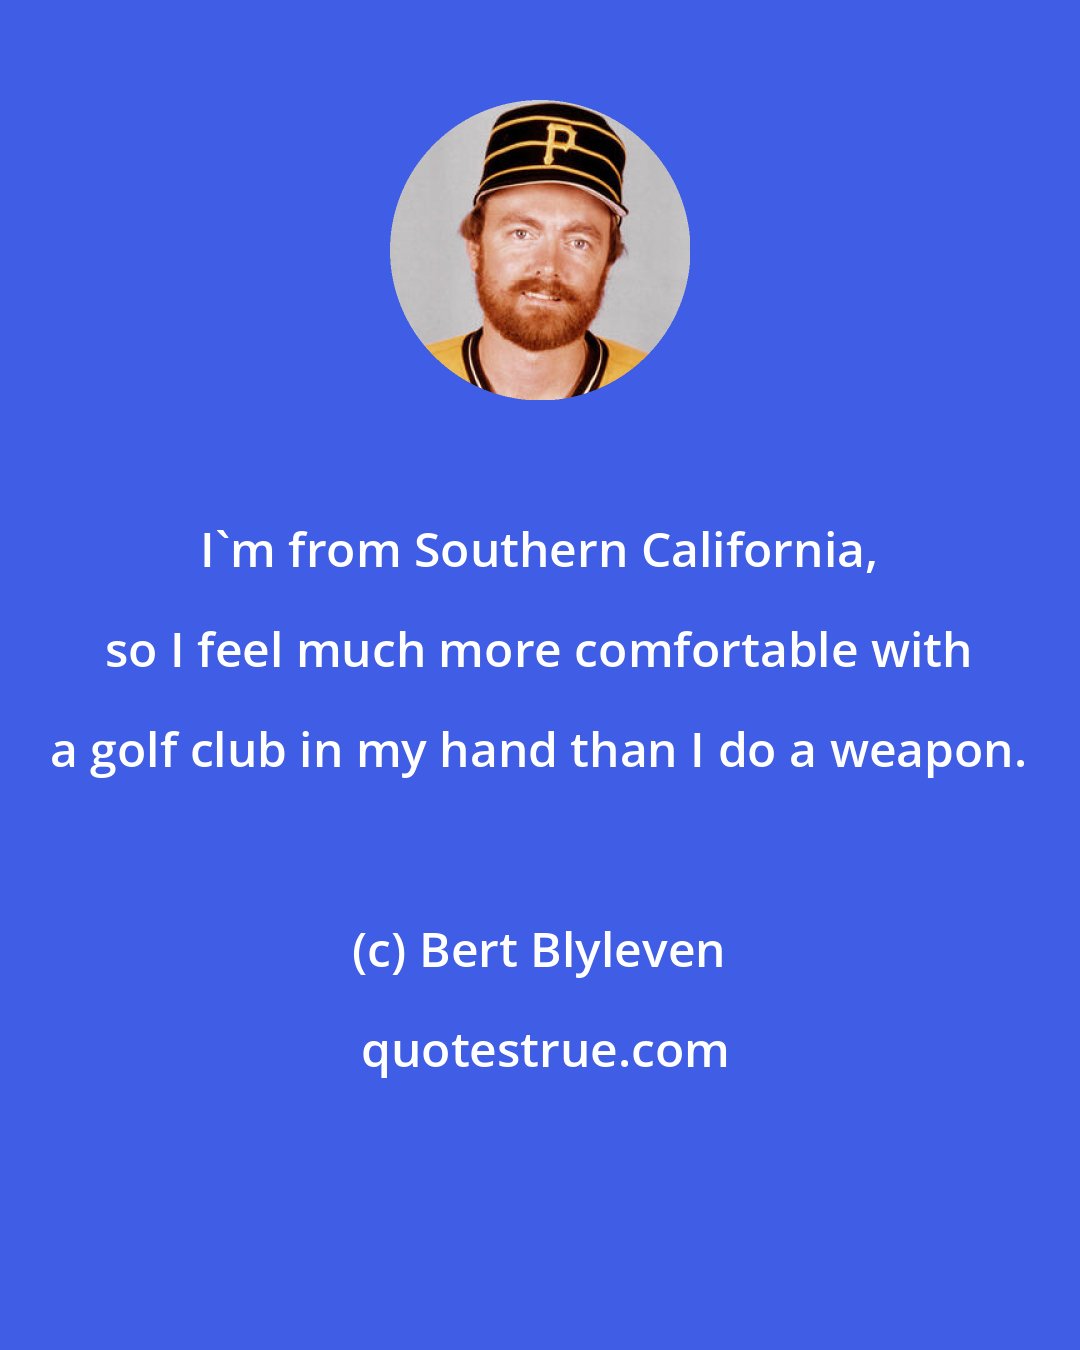 Bert Blyleven: I'm from Southern California, so I feel much more comfortable with a golf club in my hand than I do a weapon.